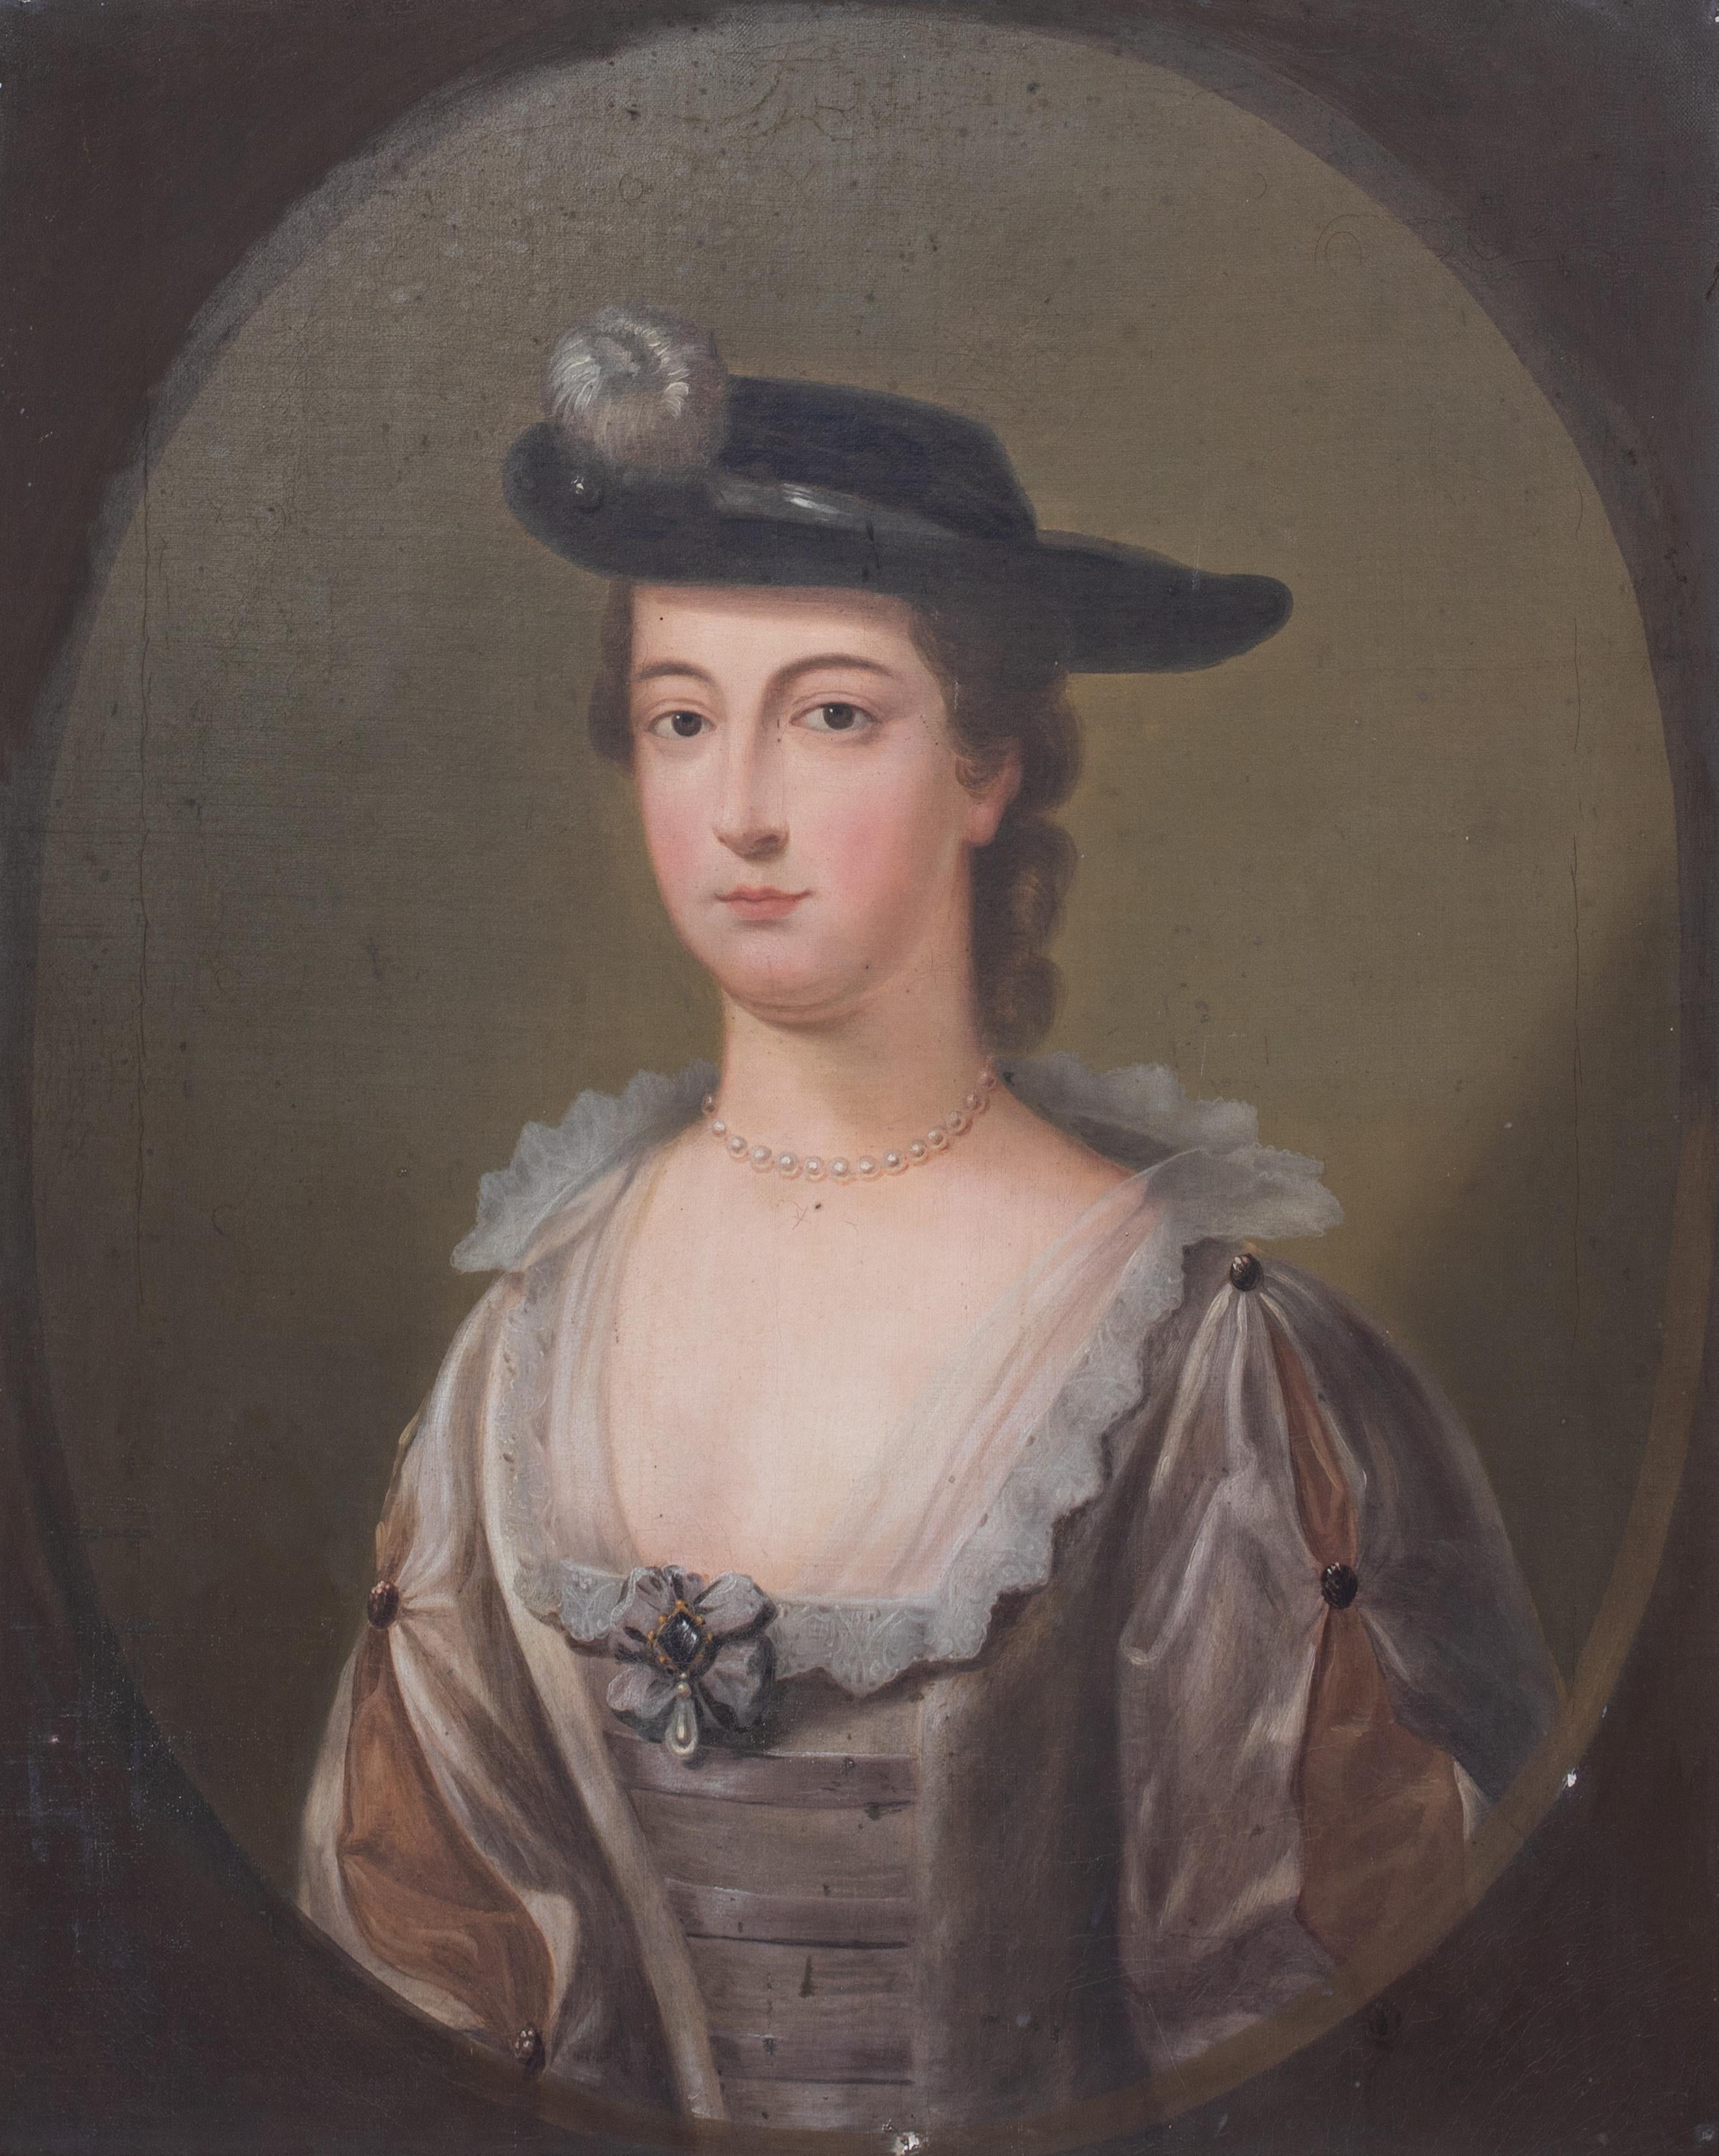 Portrait of Mary Anne Ward (1725-1754) In Riding Attire, 18th Century 

School of Henry Pickering (1720-1770)

Large 18th English portrait of Mary Anne Ward wearing a riding hat, oil on canvas. Excellent quality and condition of Ward in her riding